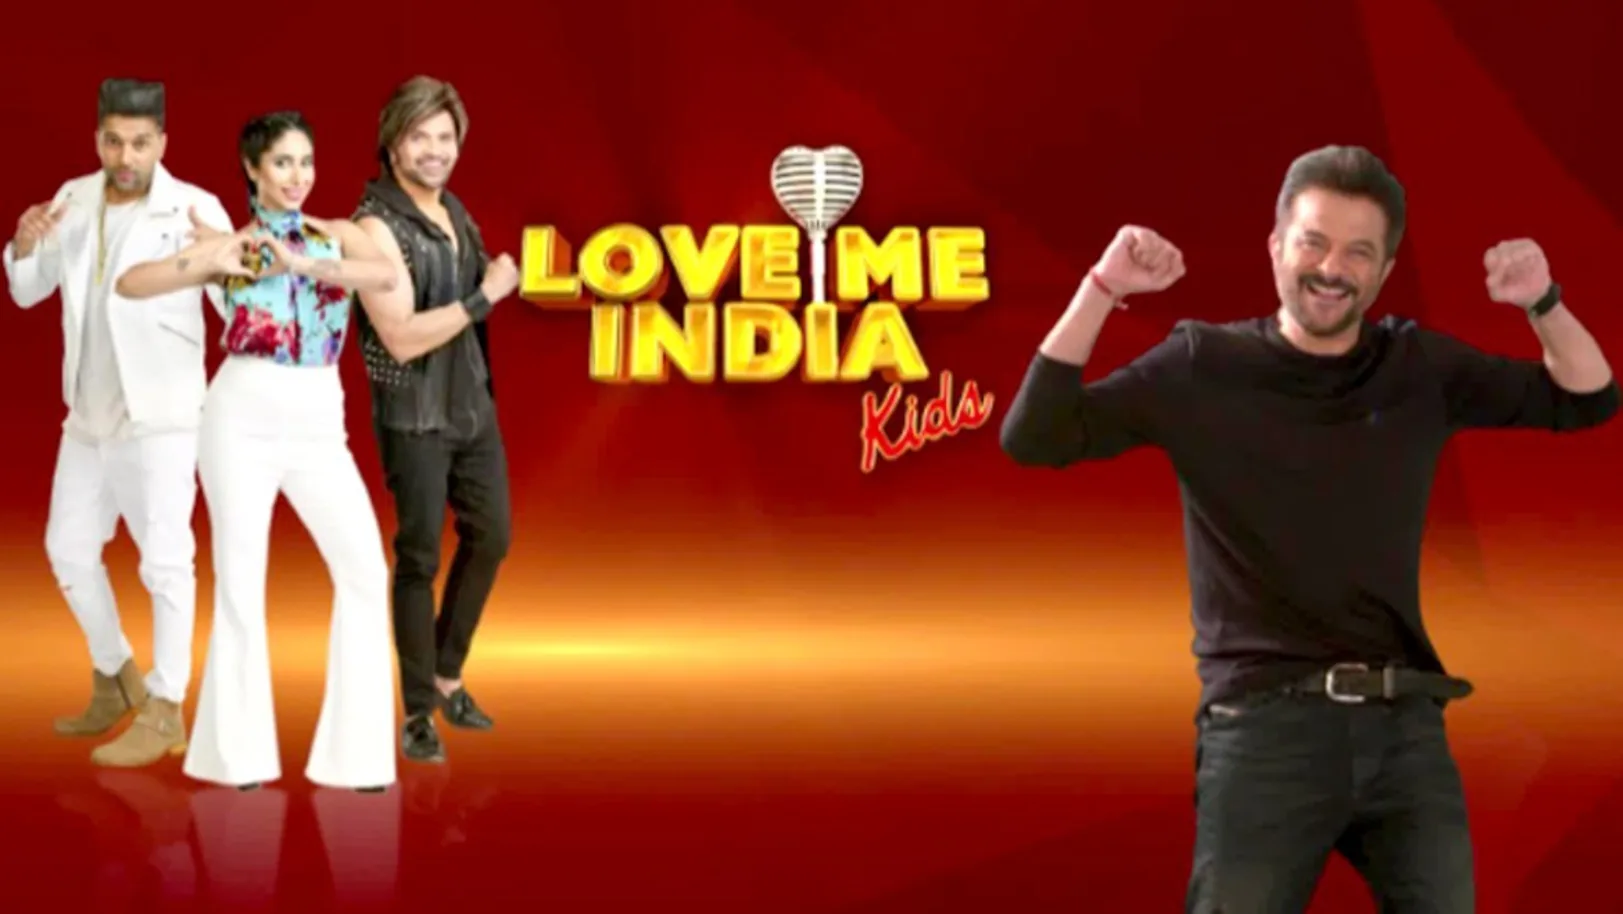 Kids and Captains try Anil Kapoor’s signature step – Love Me India Kids